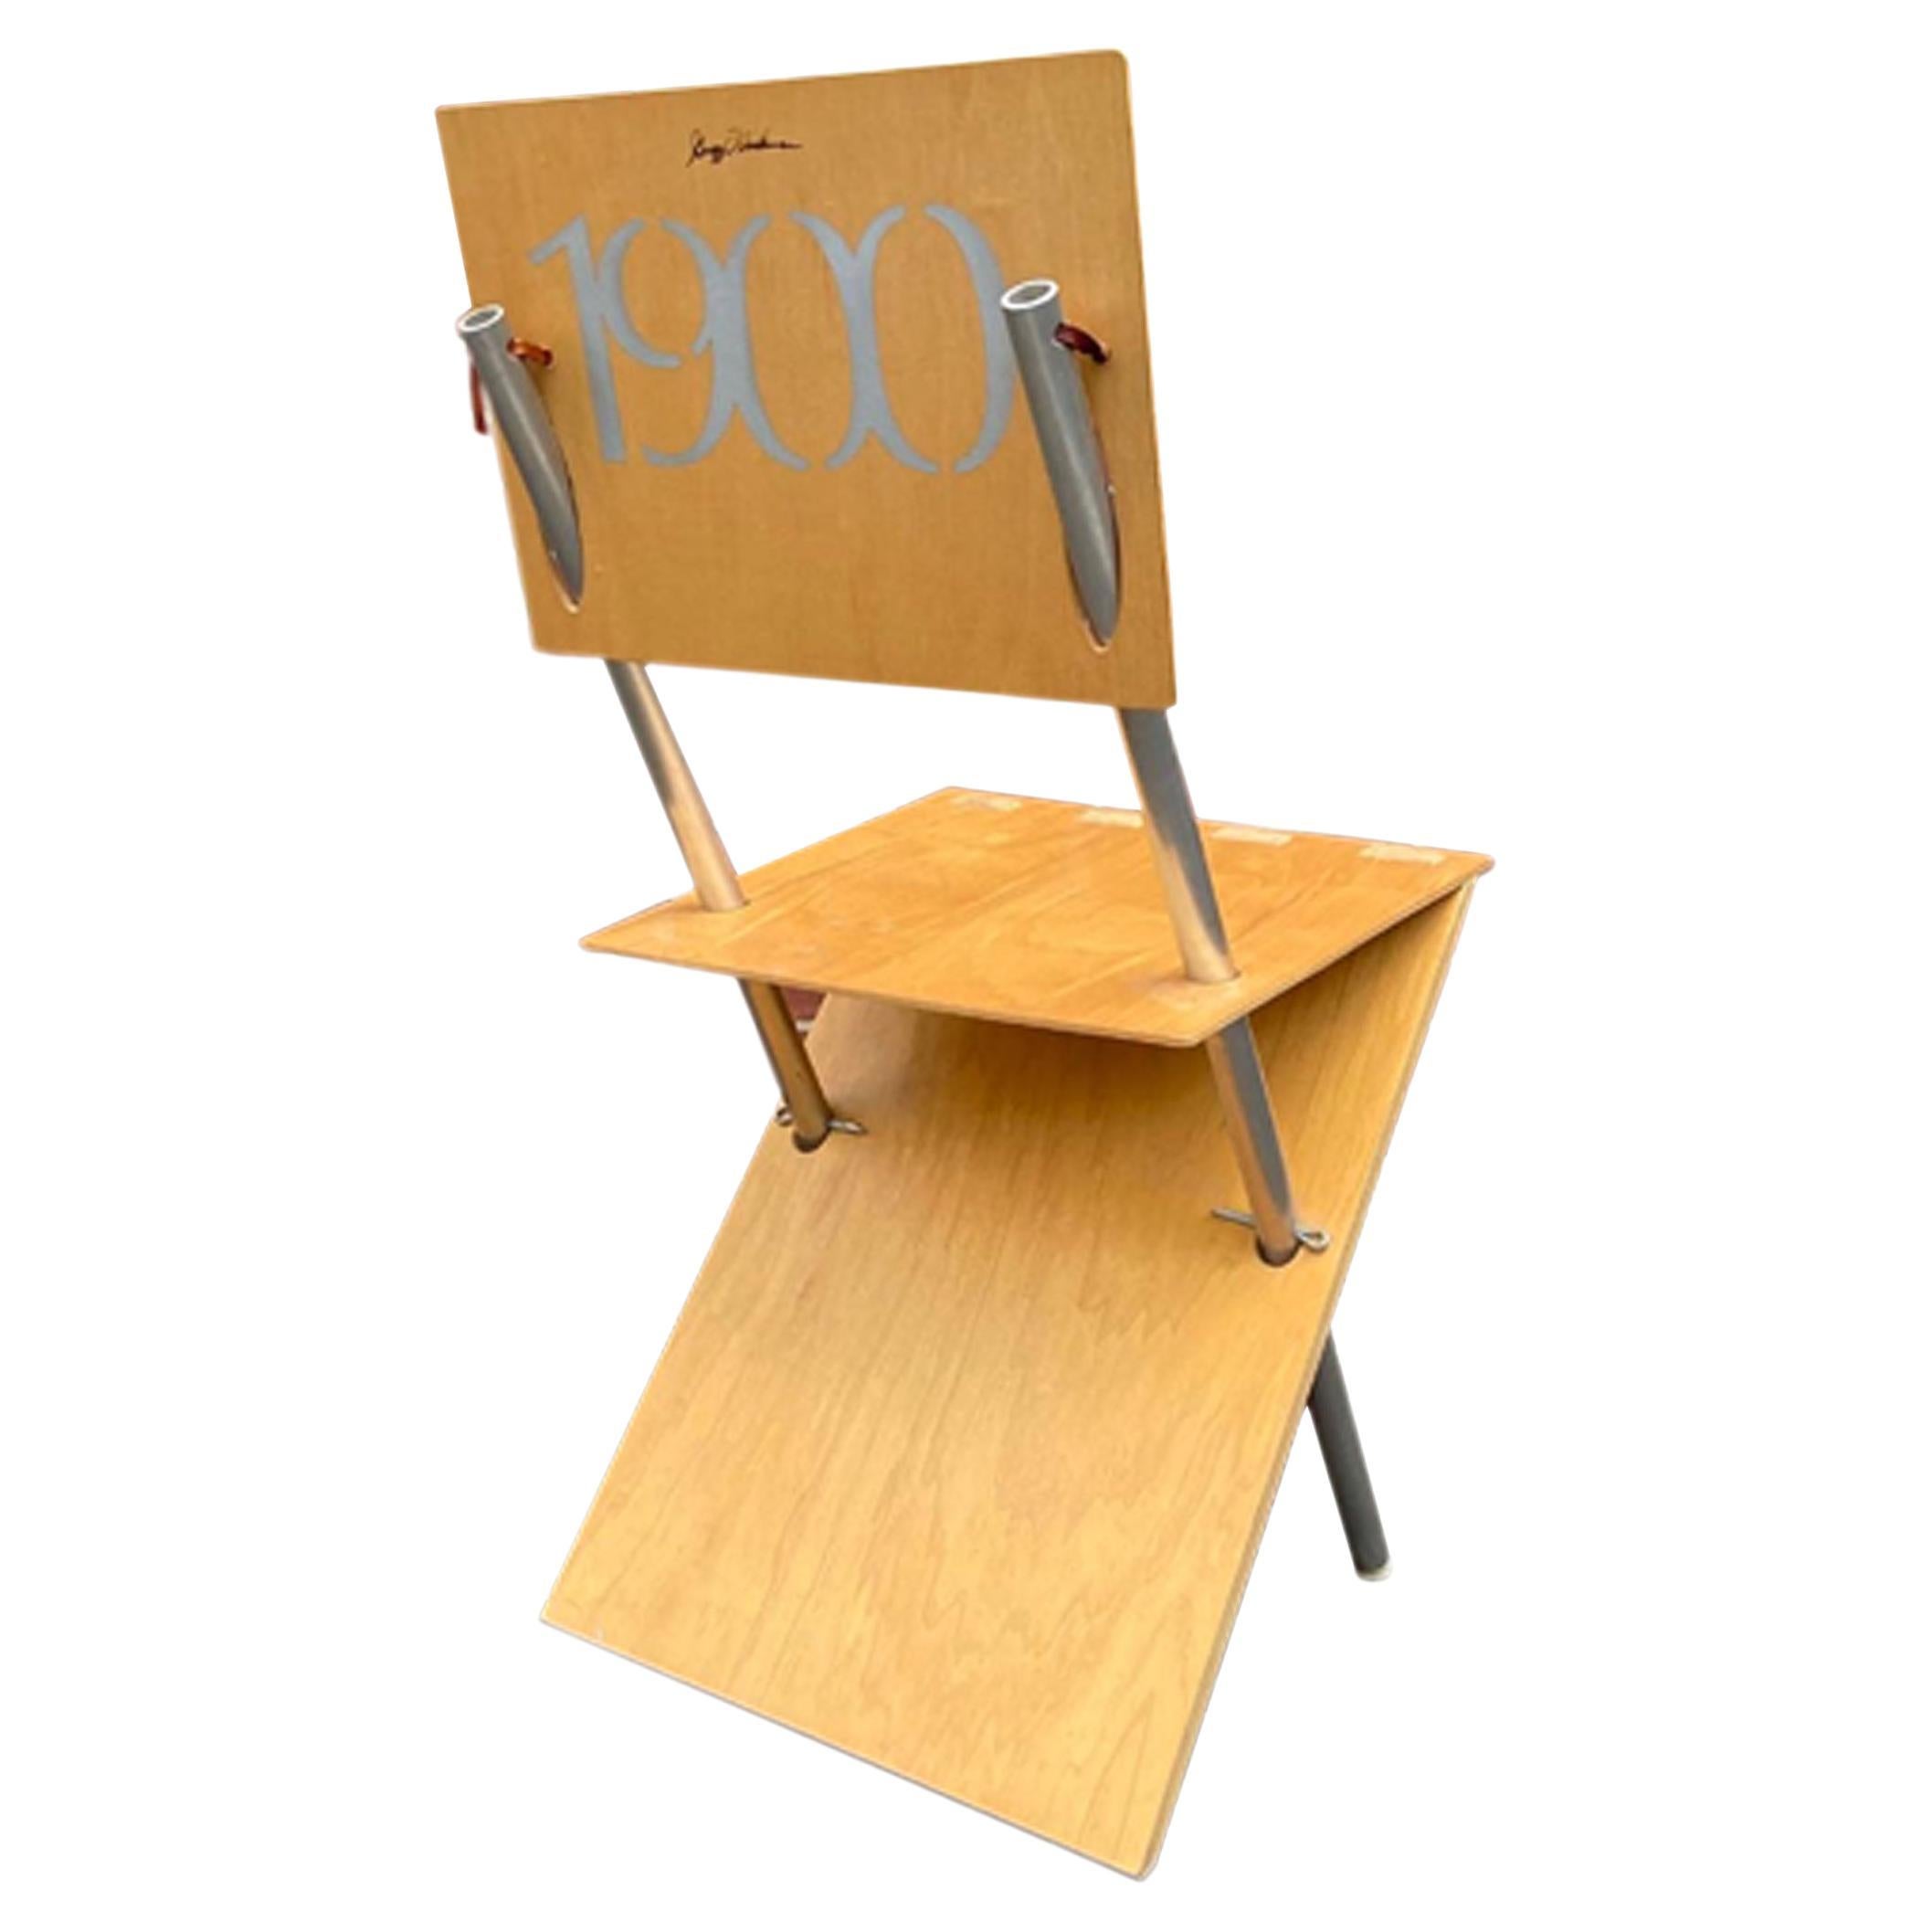 A 1990s Postmodern wood and metal chair designed by American architect Gregg Fleishman. The artistically designed chair is composed of three Euro Birch plywood panels that are pierced and supported by two metal rods, pins, and leather ties. The back